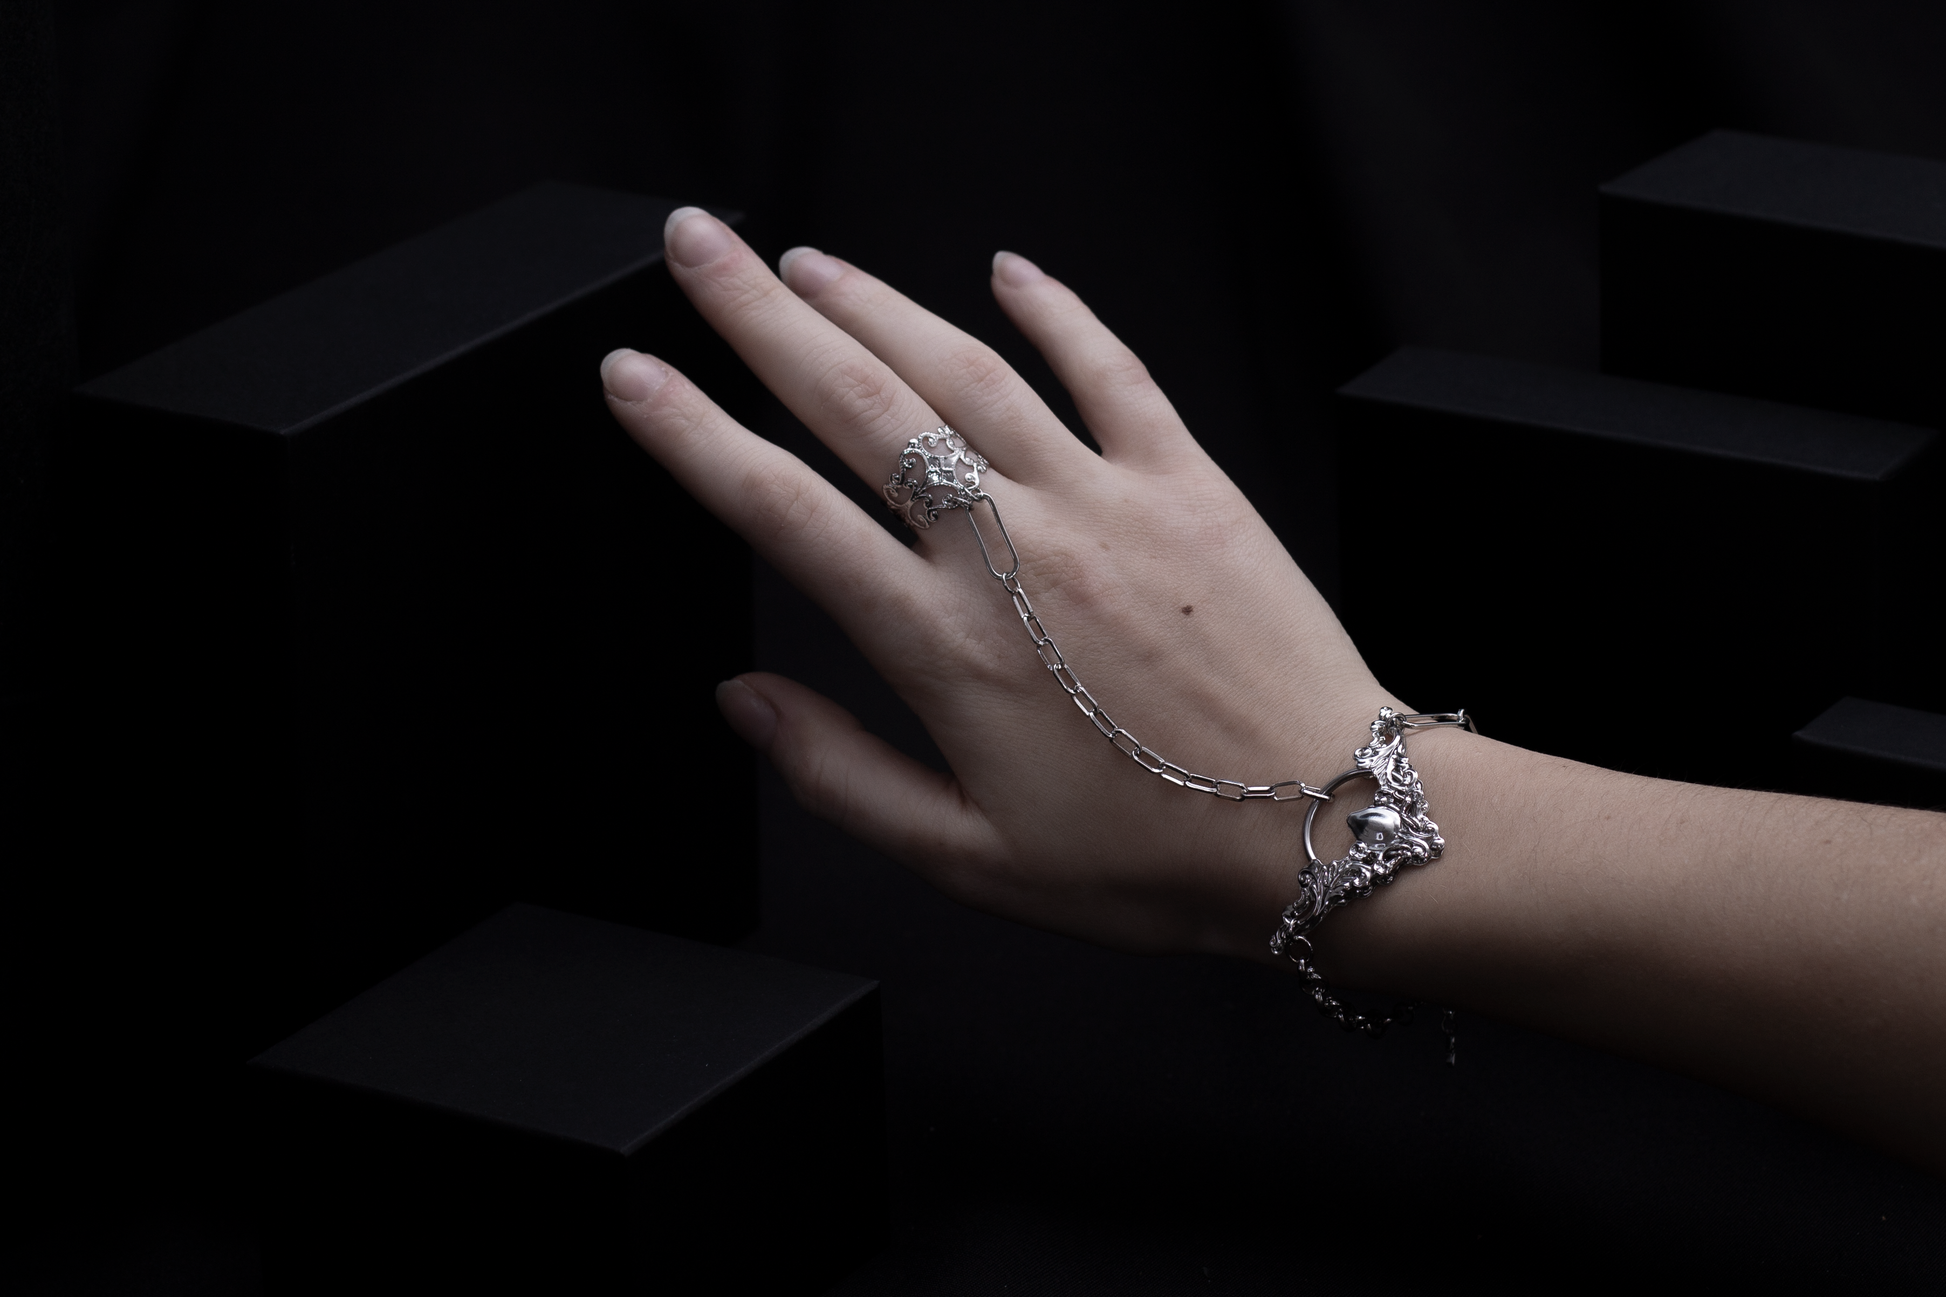 A pale hand adorned with a Myril Jewels hand chain bracelet ring, showcasing neo-gothic design. This elegant accessory, perfect for gothic and alternative style lovers, adds a touch of dark-avantgarde charm to any look, ideal for Halloween, rave parties, or as a unique gift for the goth girlfriend.